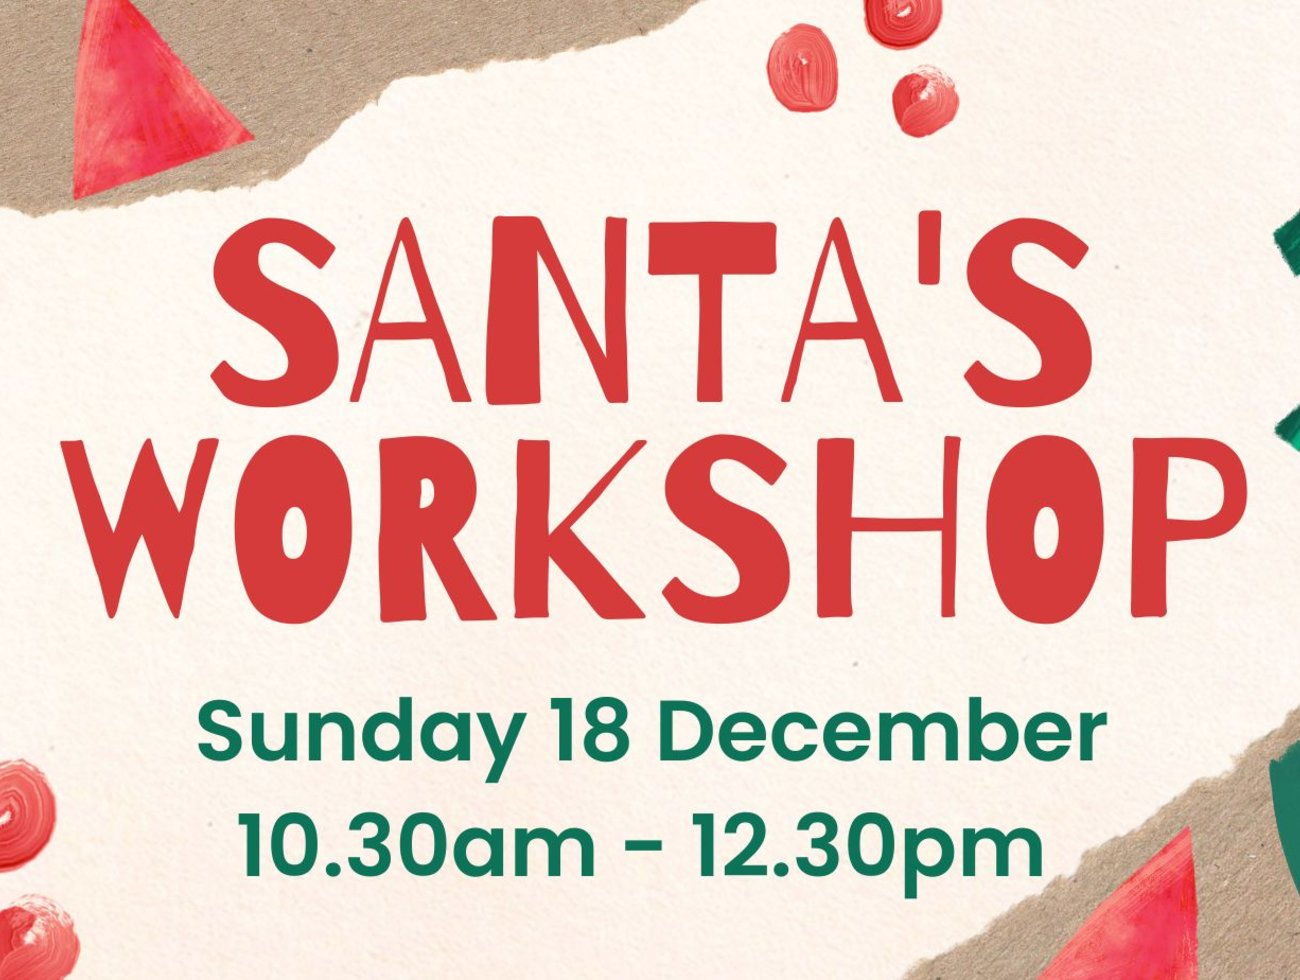 Santa's Workshop and Grotto